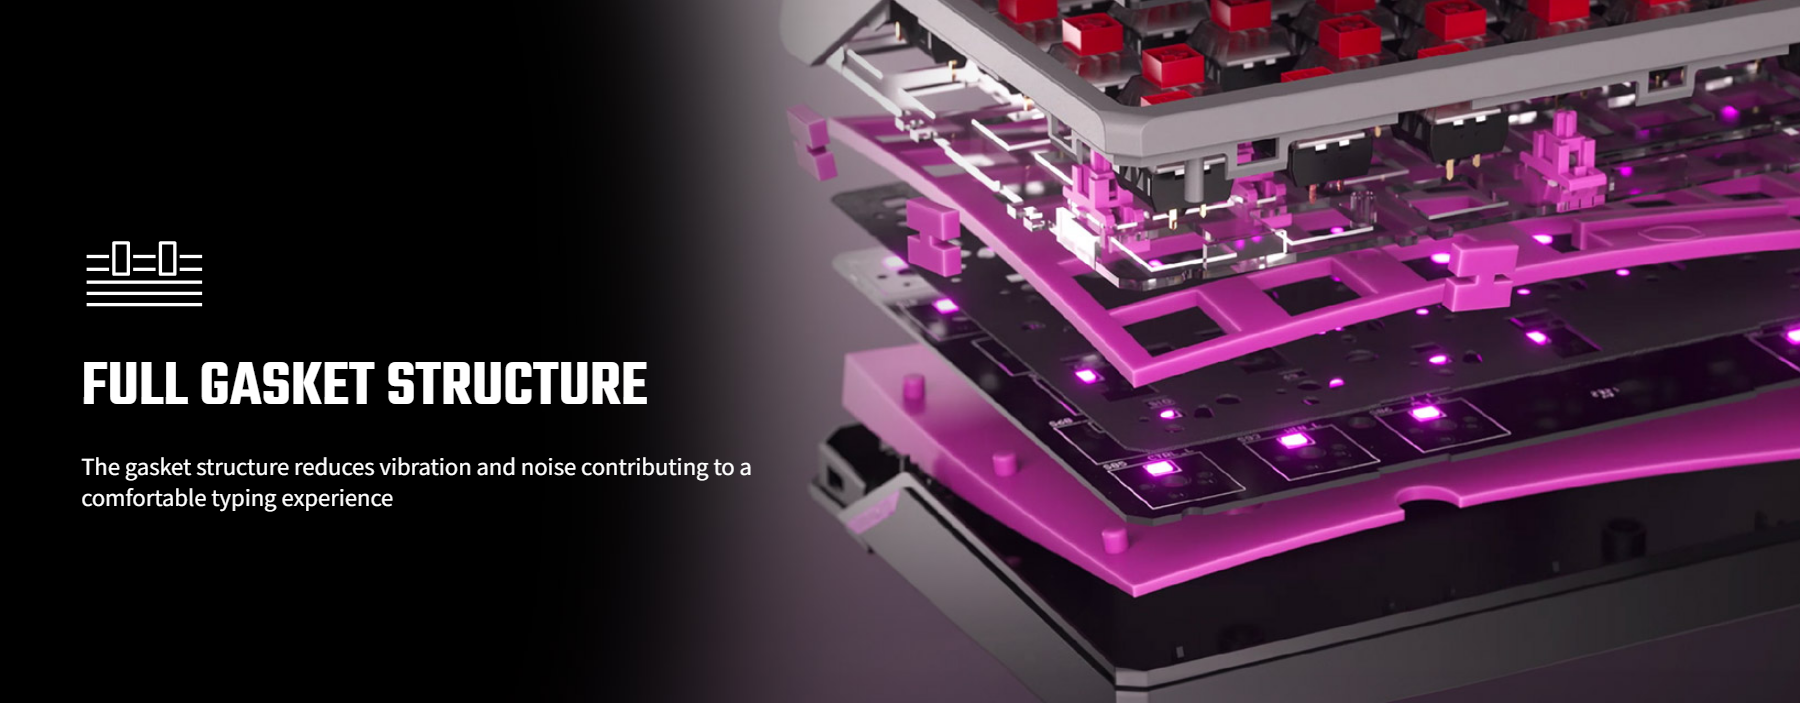 A large marketing image providing additional information about the product Cooler Master MK770 Macaron Hybrid Wireless Keyboard - Kailh Box V2 Red Switch - Additional alt info not provided